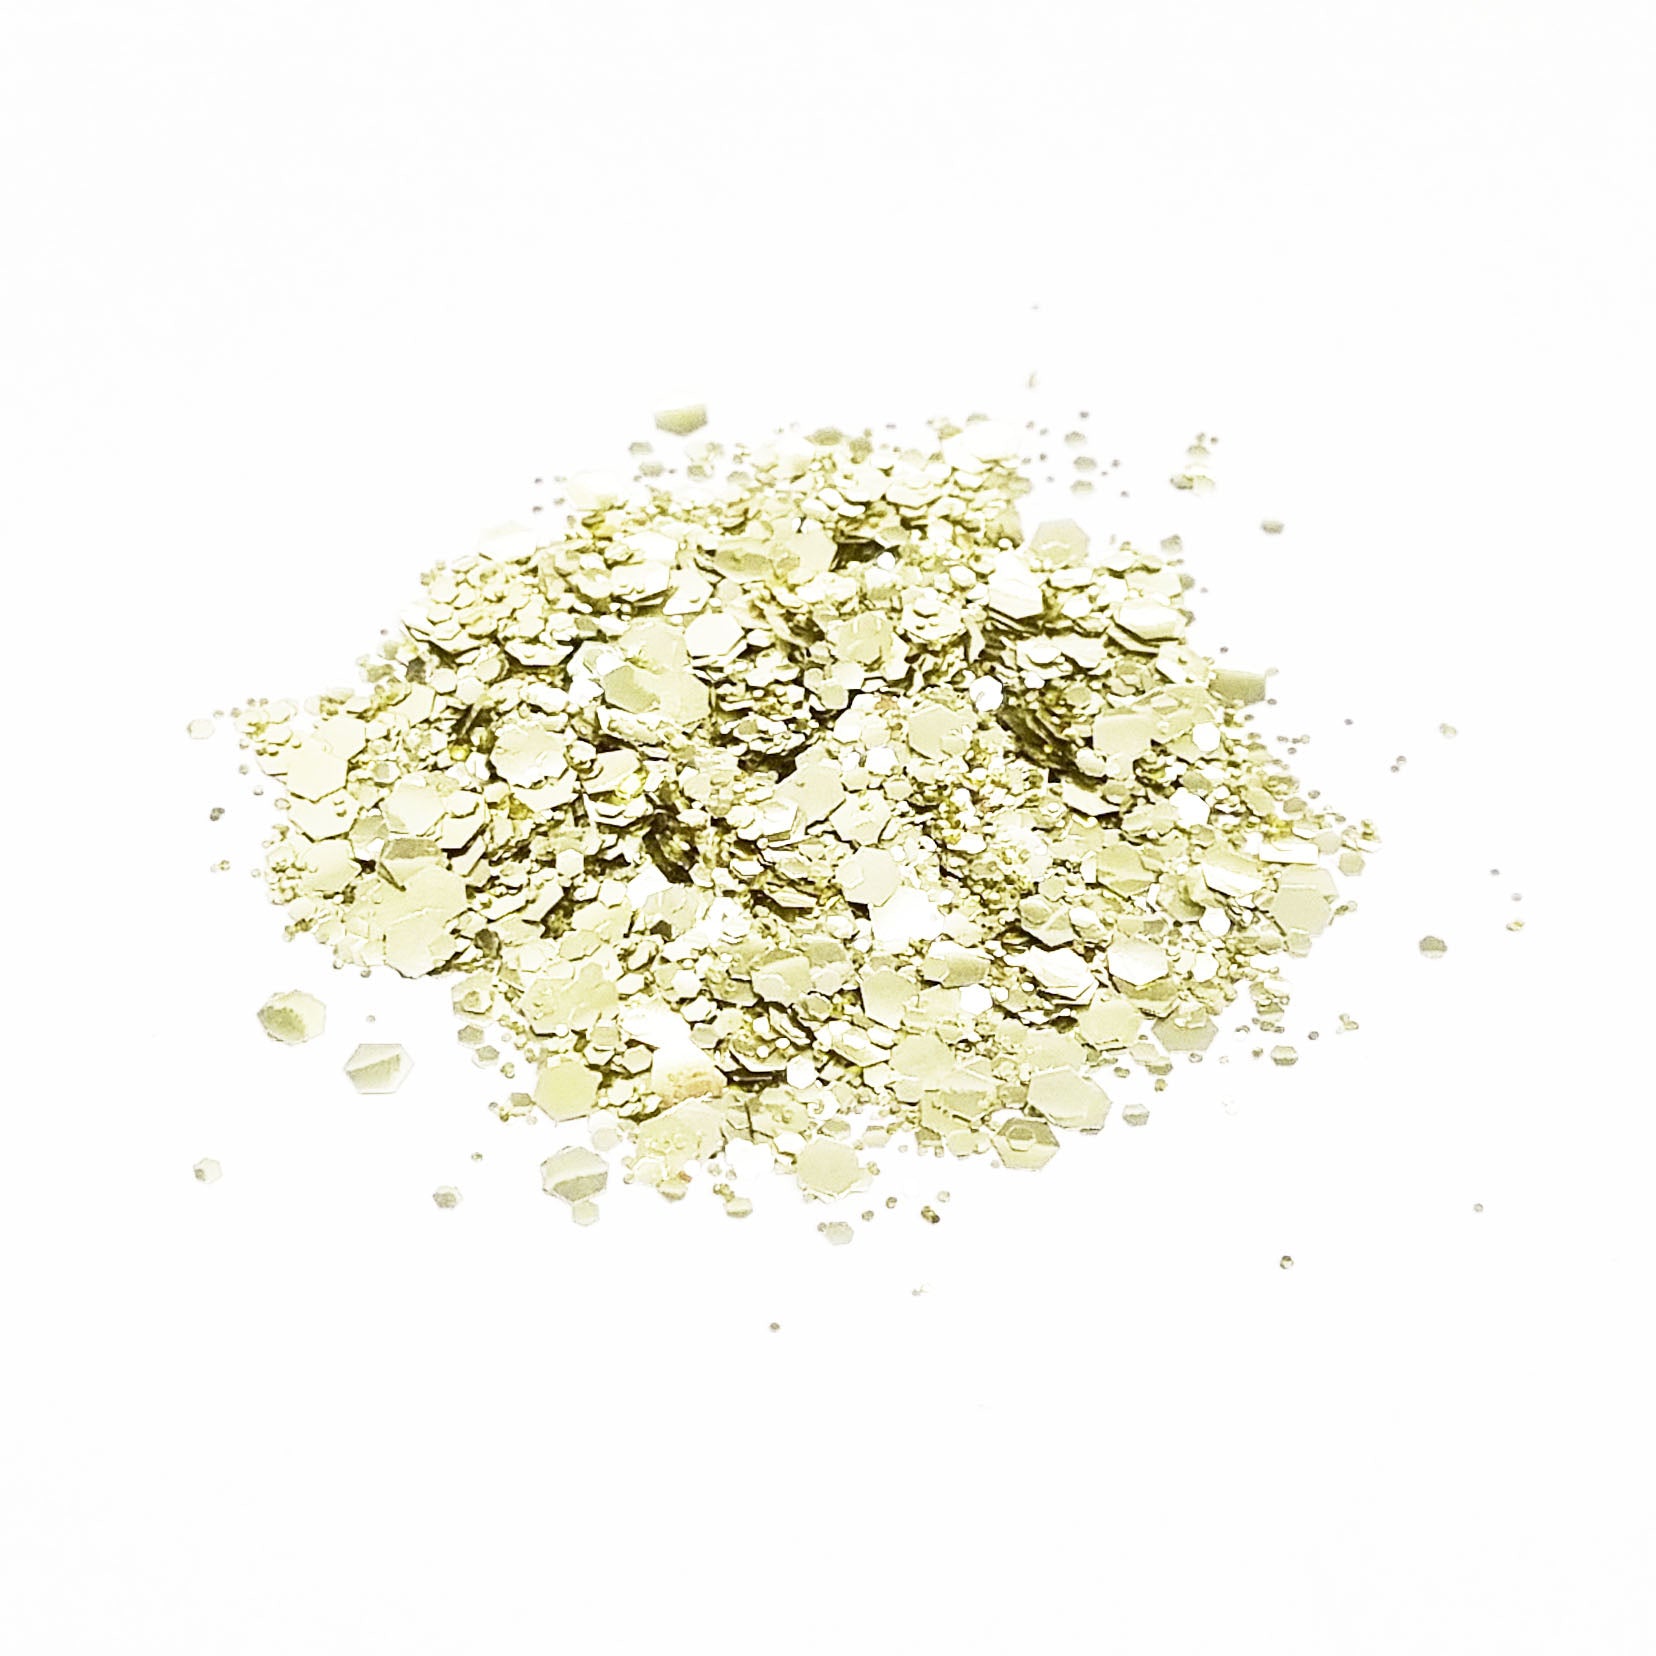 Gold Biodegradable Cosmetic Glitter | Mix | Truly Personal | Wax Melt Bath Bombs Soap